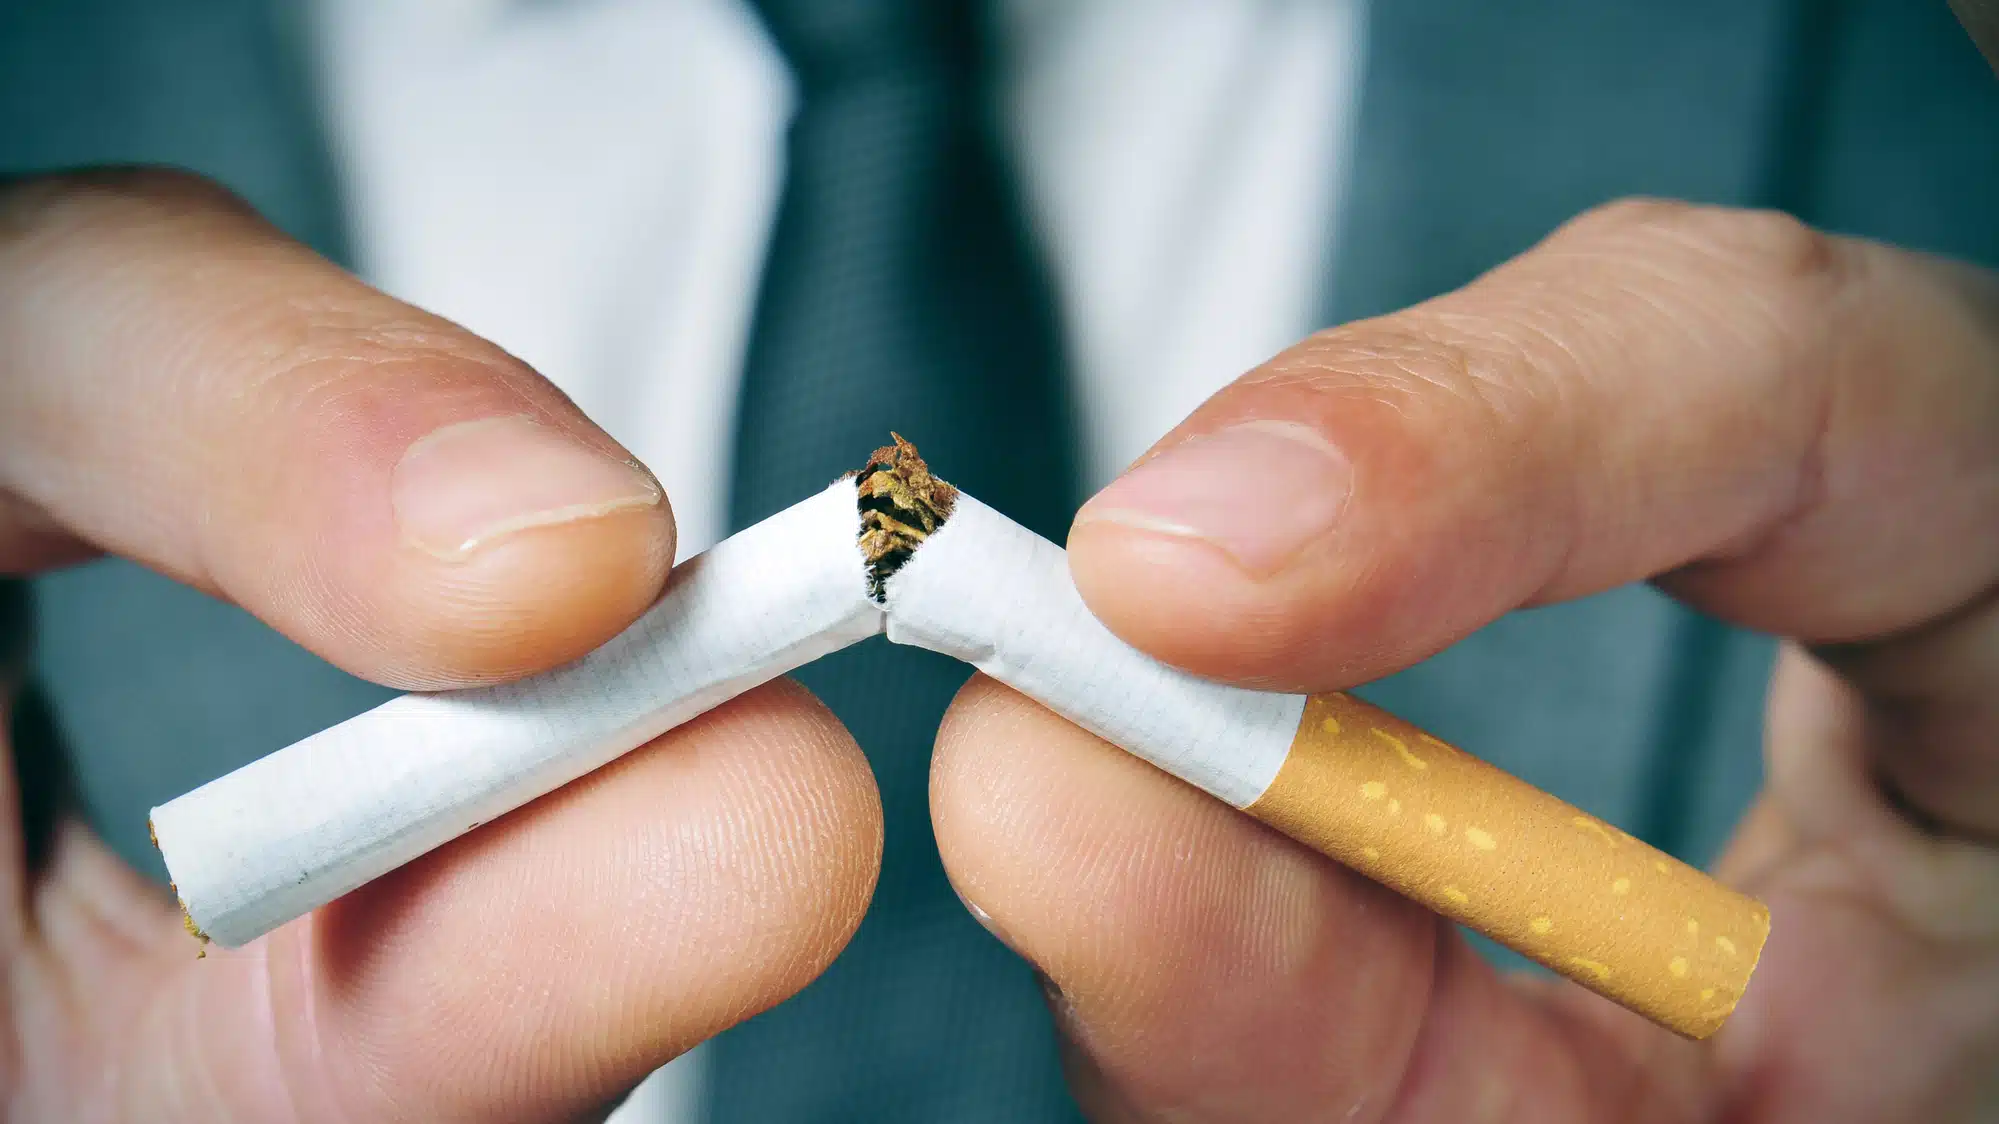 A Close-Up Of Hands Breaking A Cigarette In Half, Symbolizing Quitting Smoking.